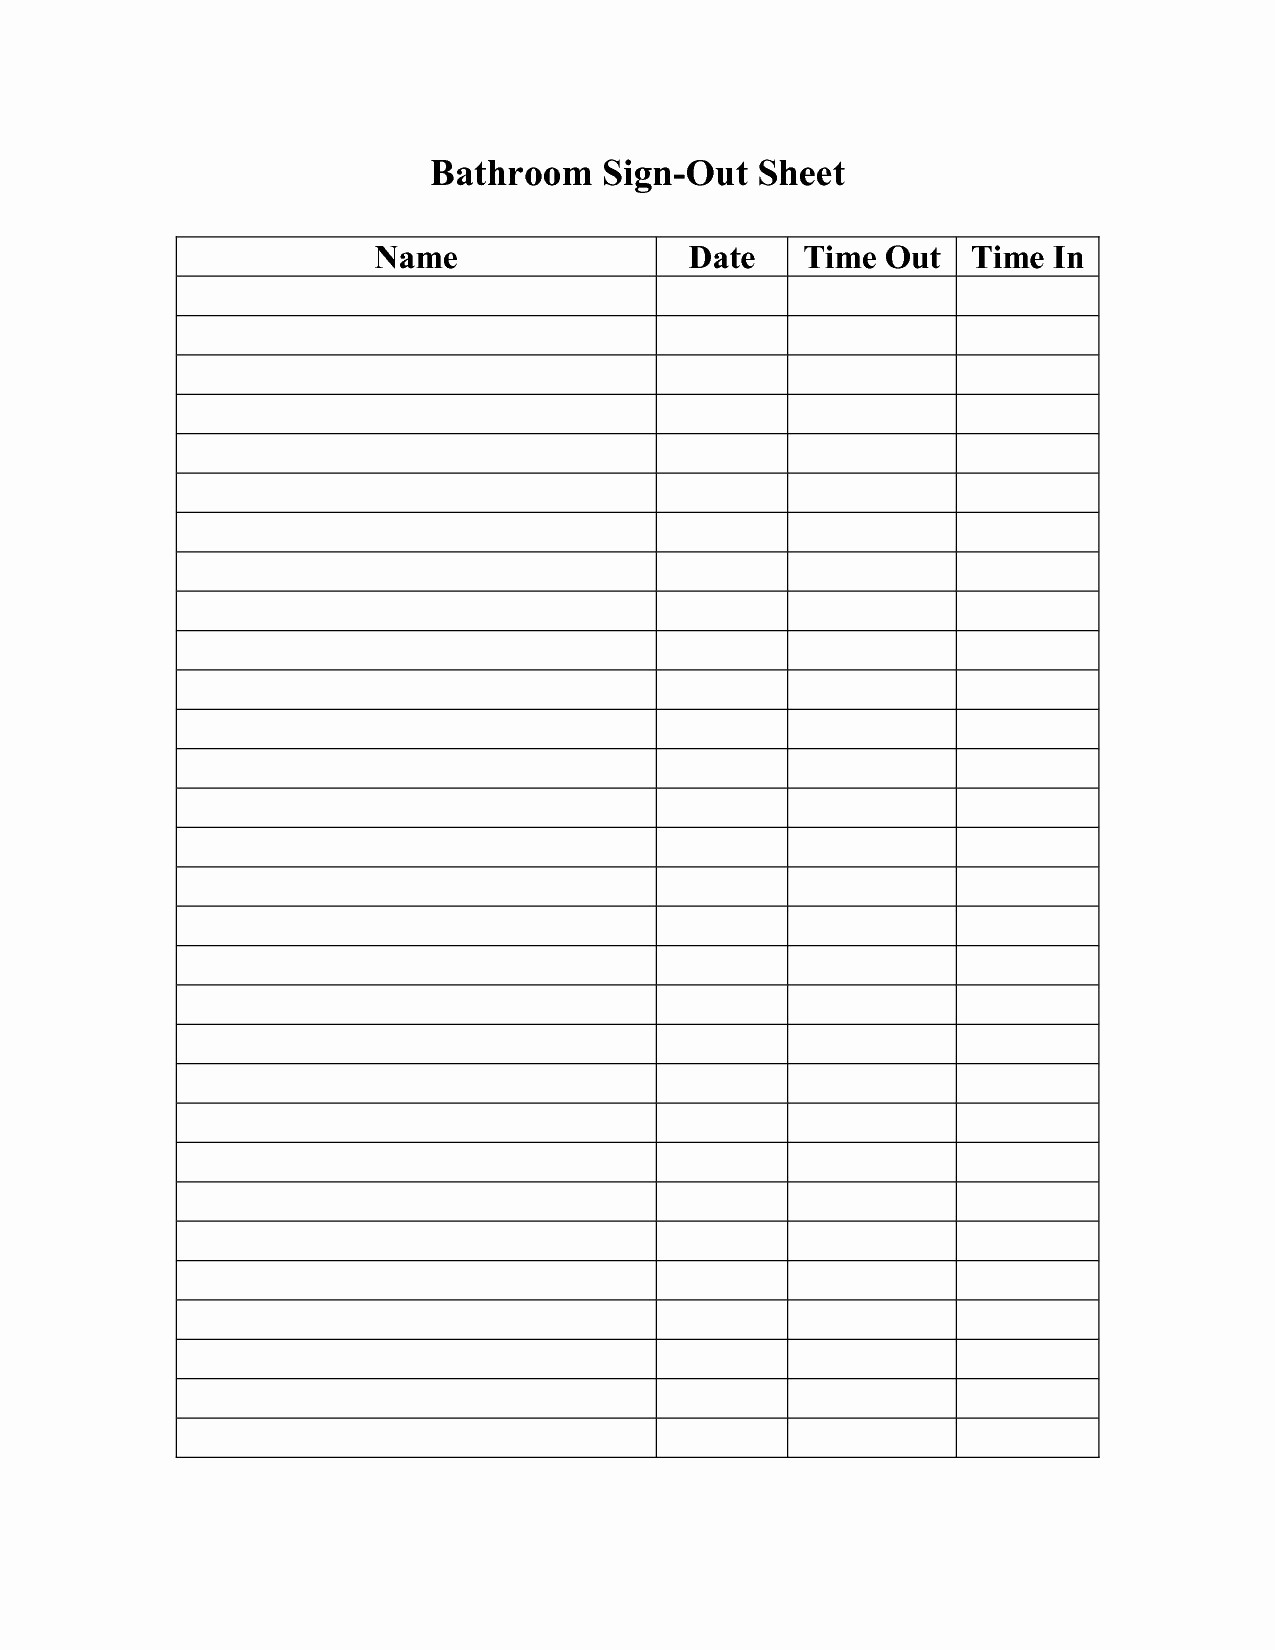 Credit Card Sign Out Sheet New 19 Lovely Spanish Family Tree Worksheet Credit Card